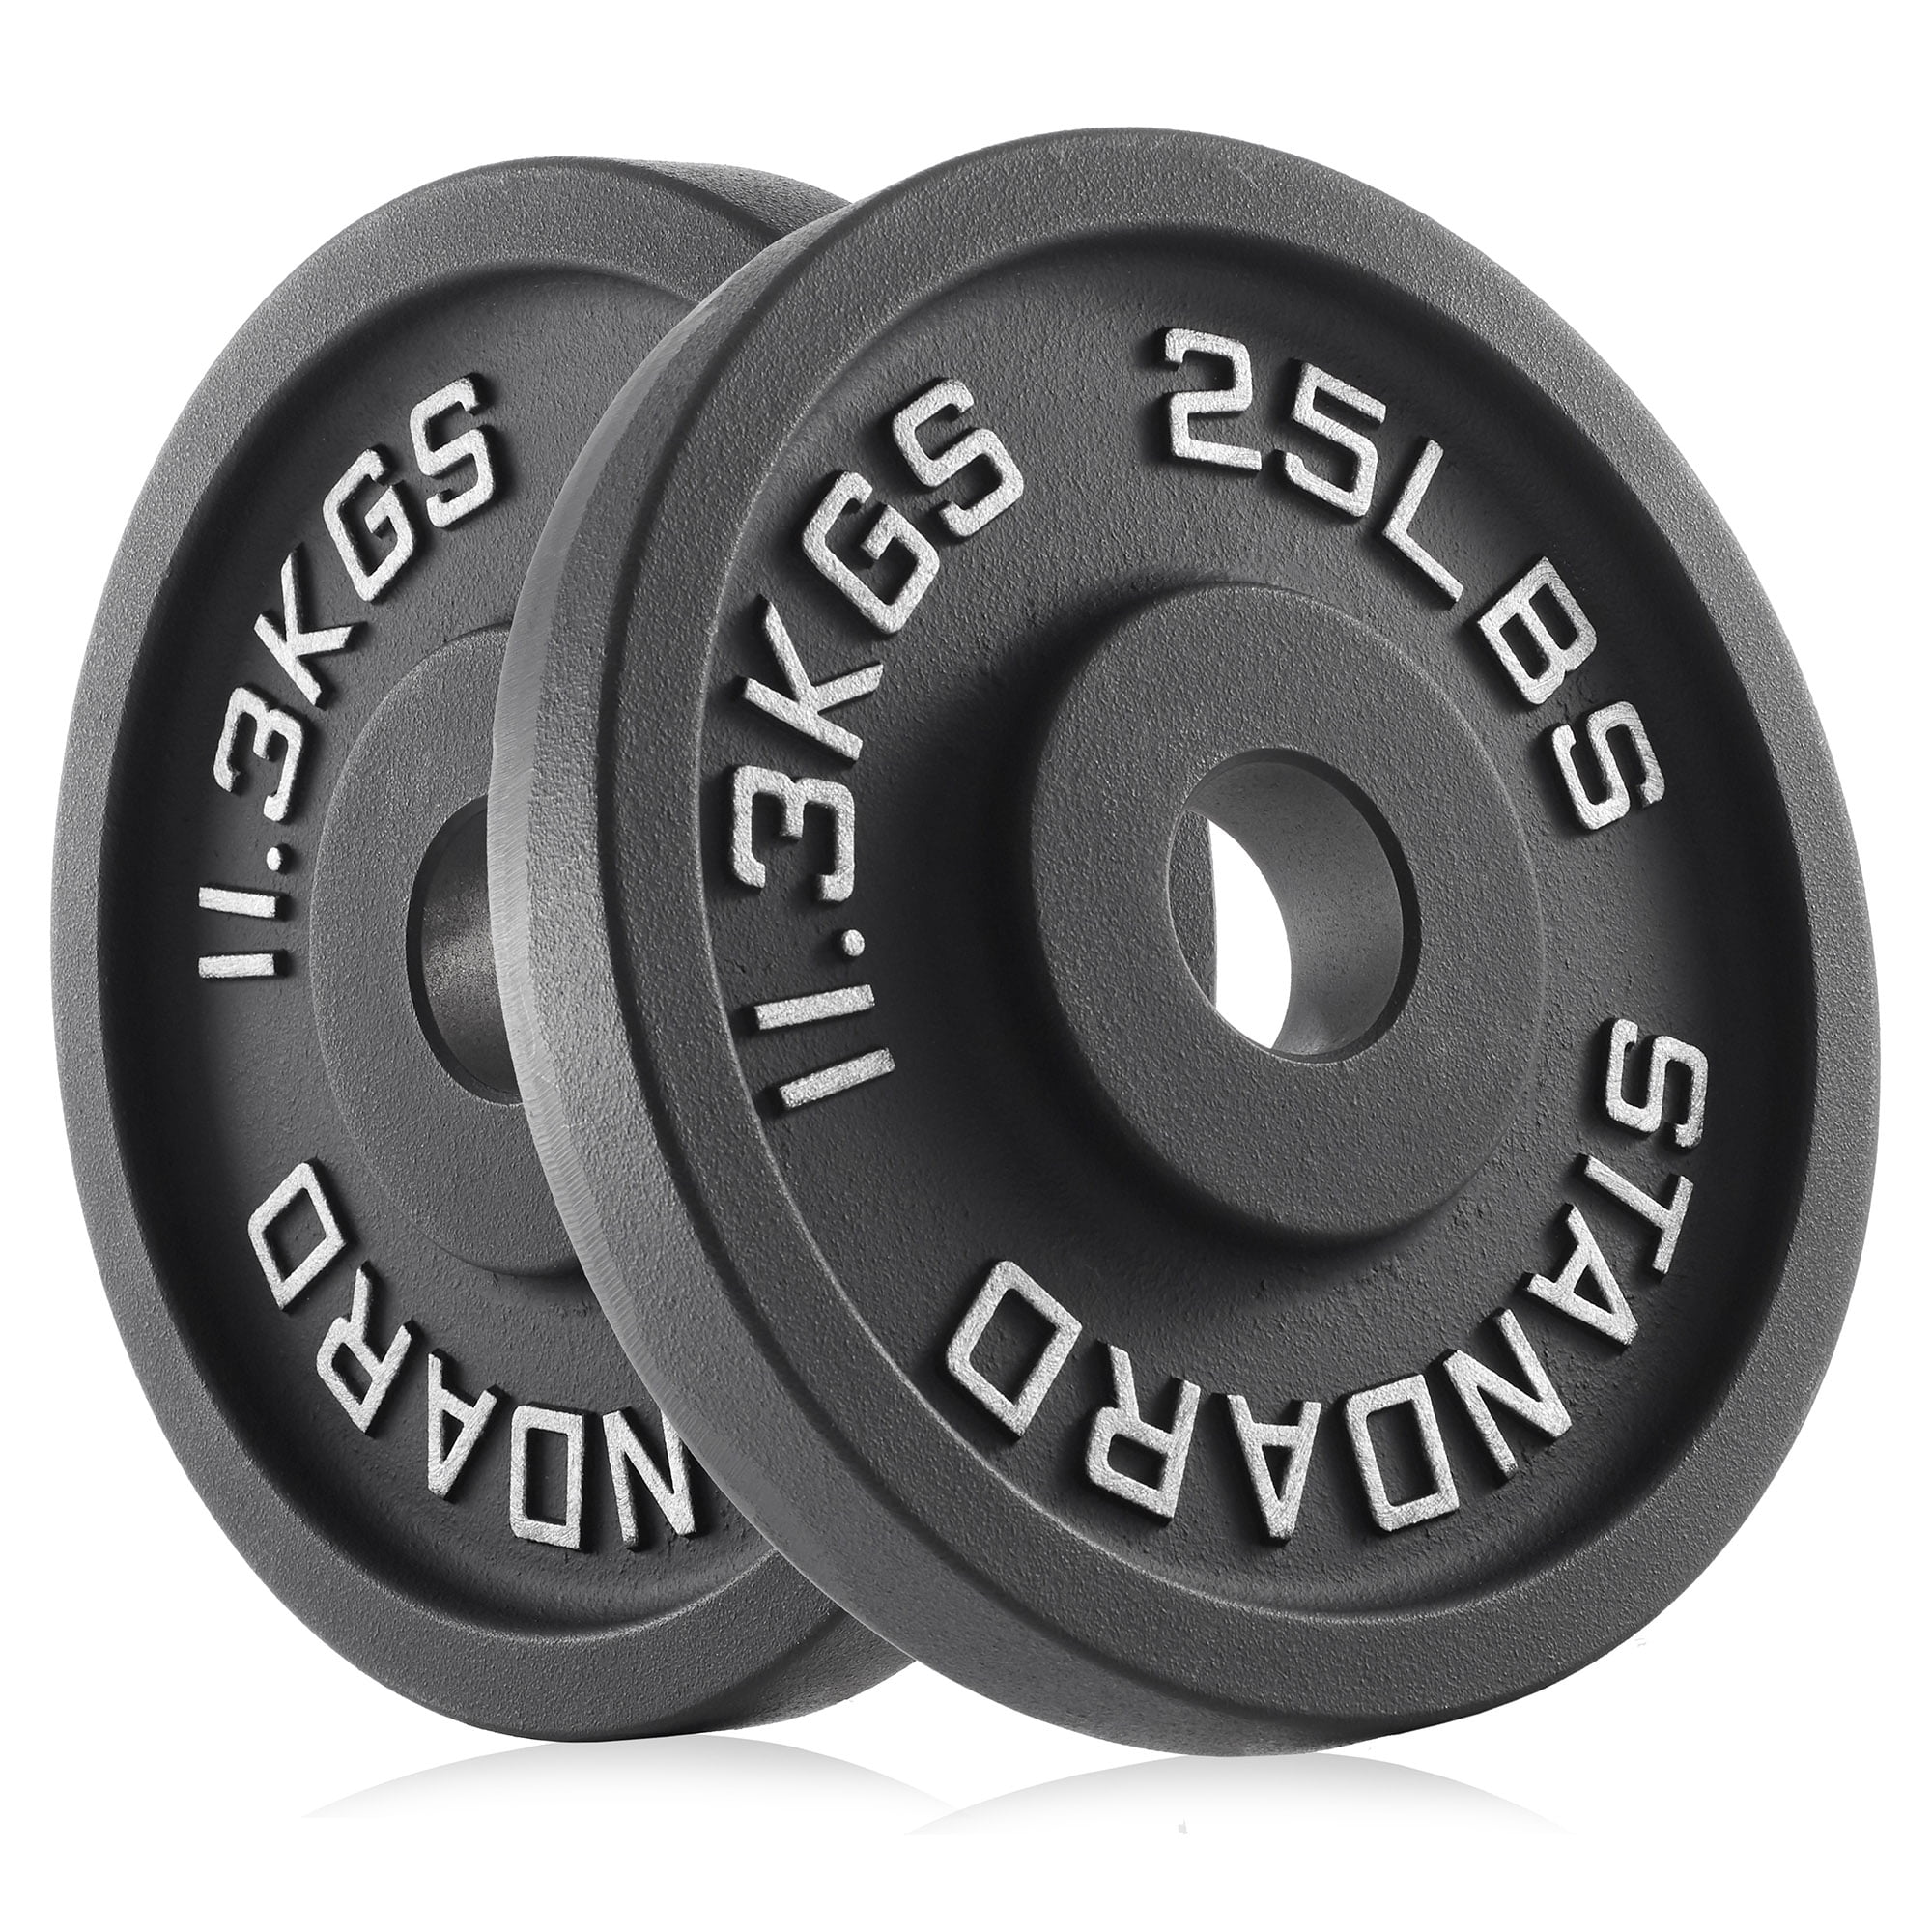 2.2 kg International Olympic 2" hole Weight Plates 11 lb Total WEIDER 2 5.5 lb 